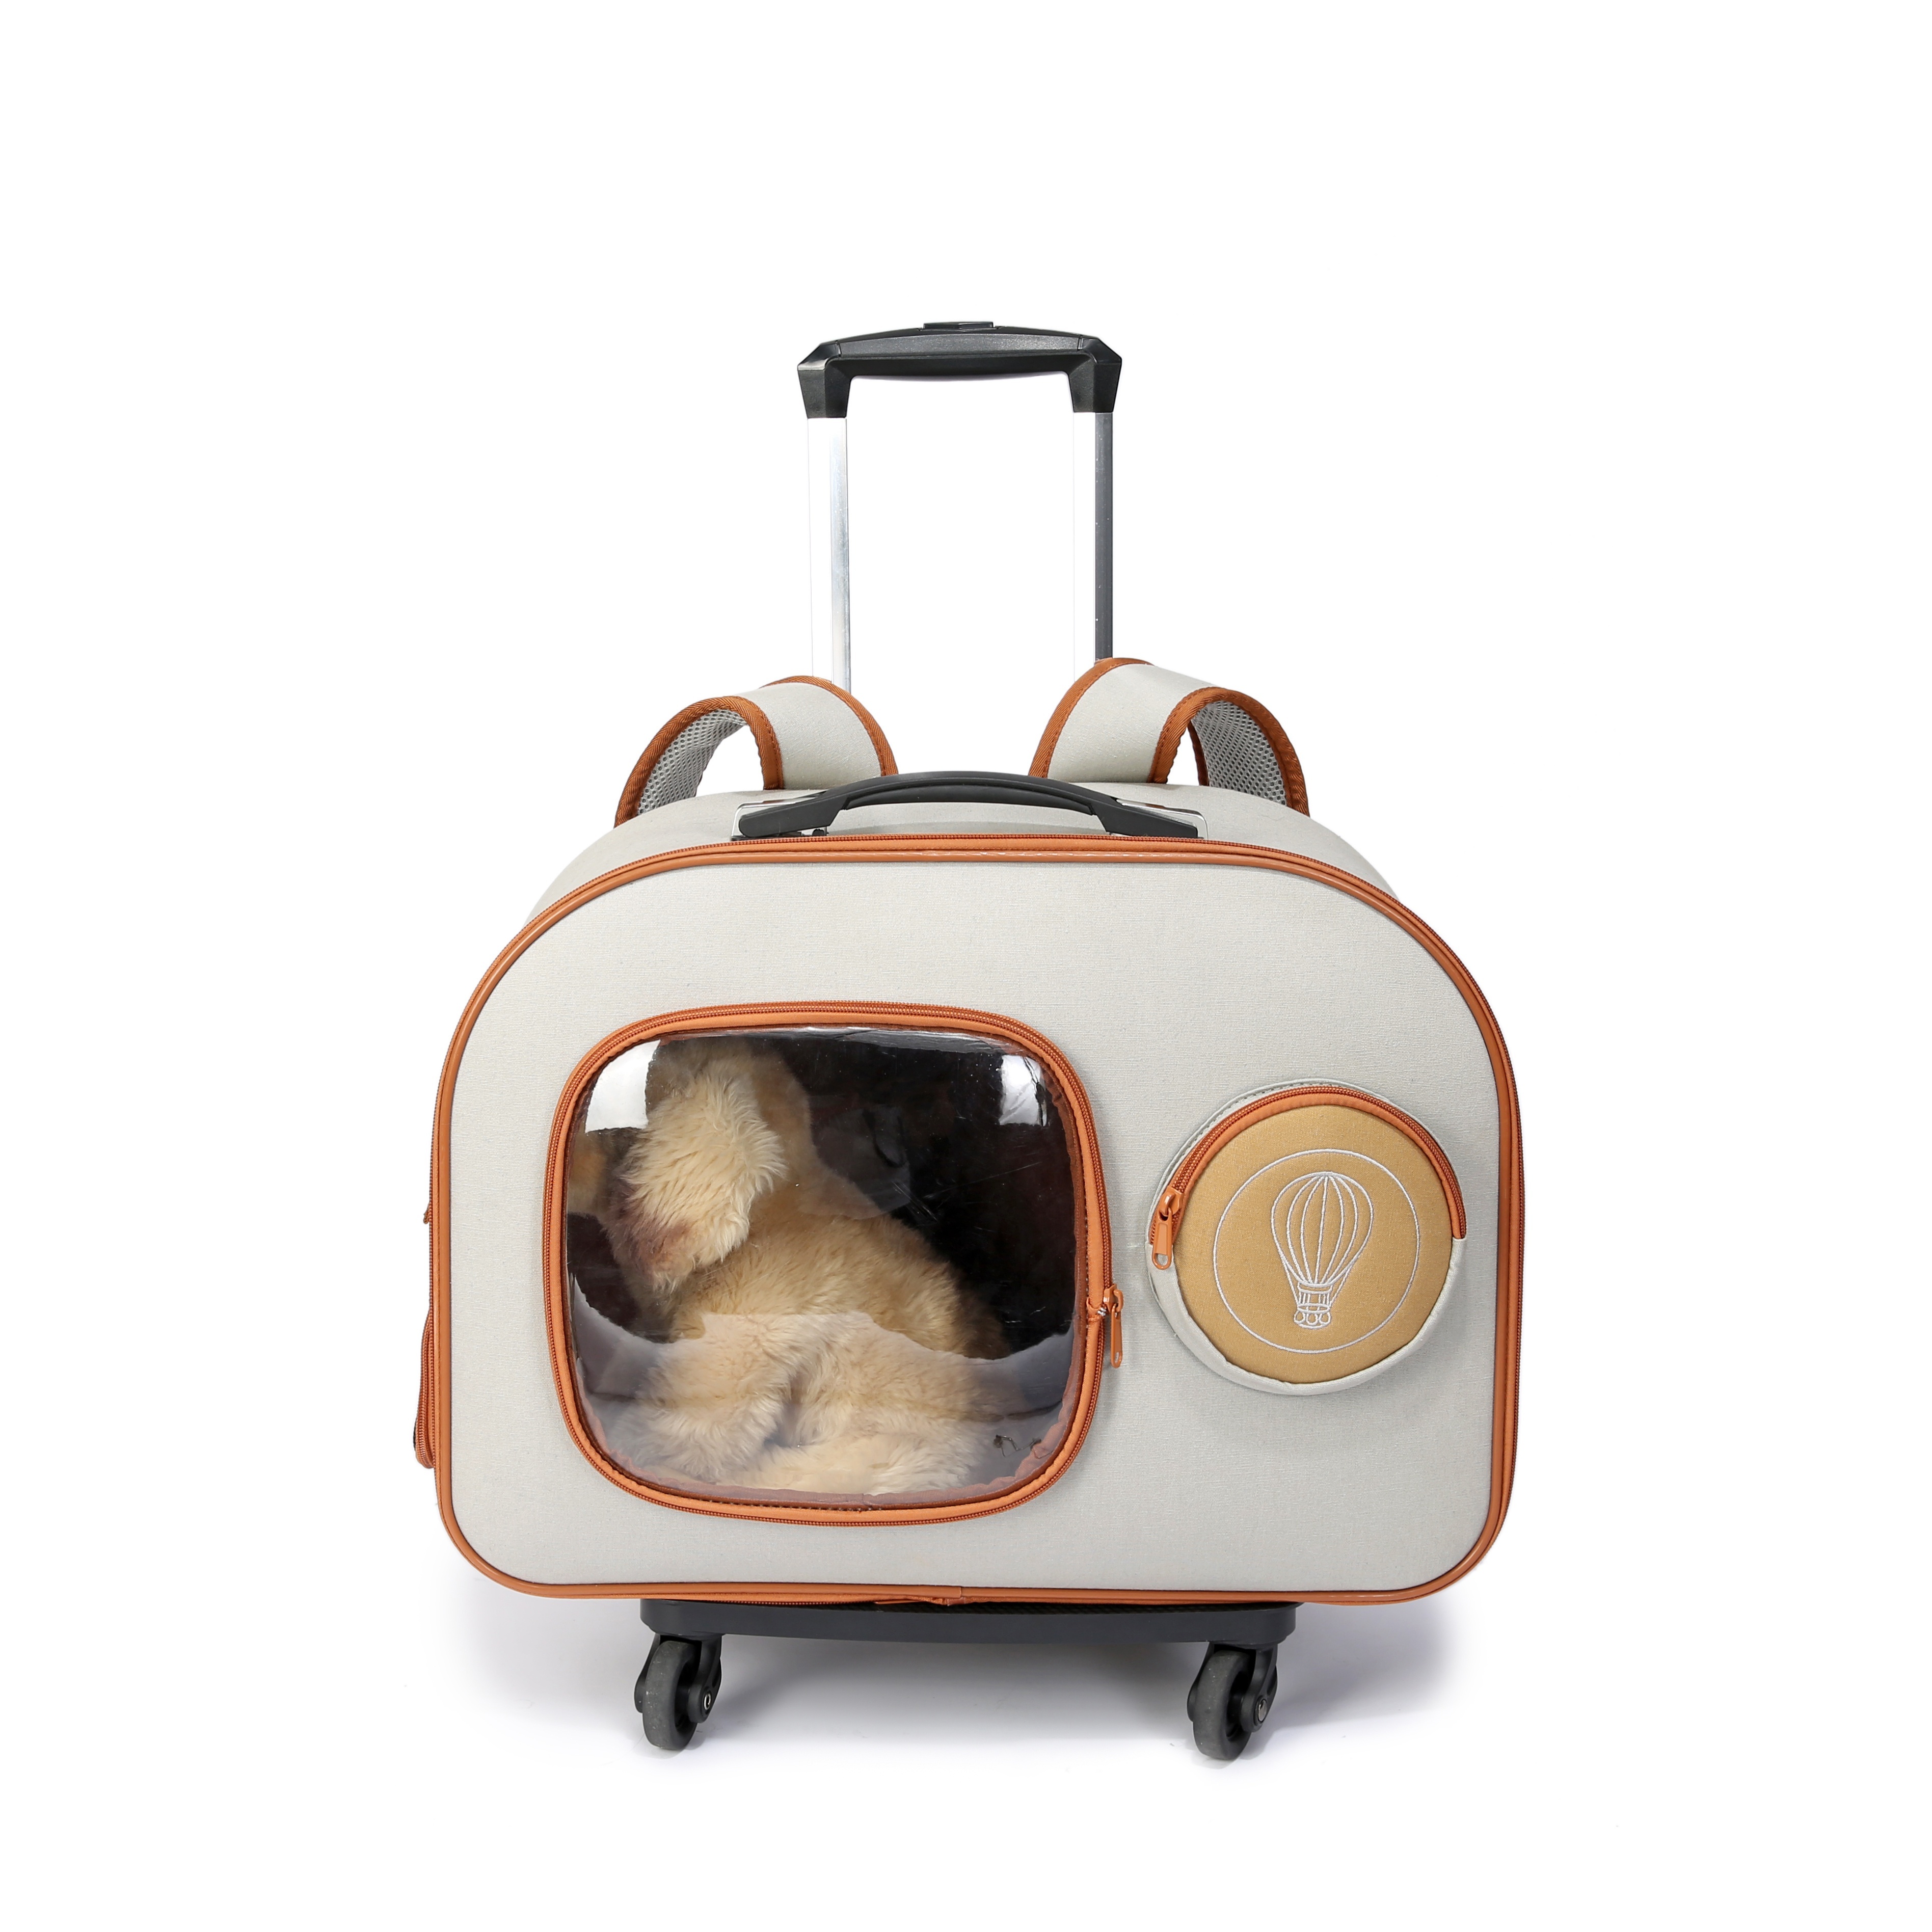 Rolling Pet Carrier with Wheels, Foldable Airline Approved Dog Carriers for  Small Dogs and Cats, Cat Carrier on Wheels, Pet Travel Carrier for Flight